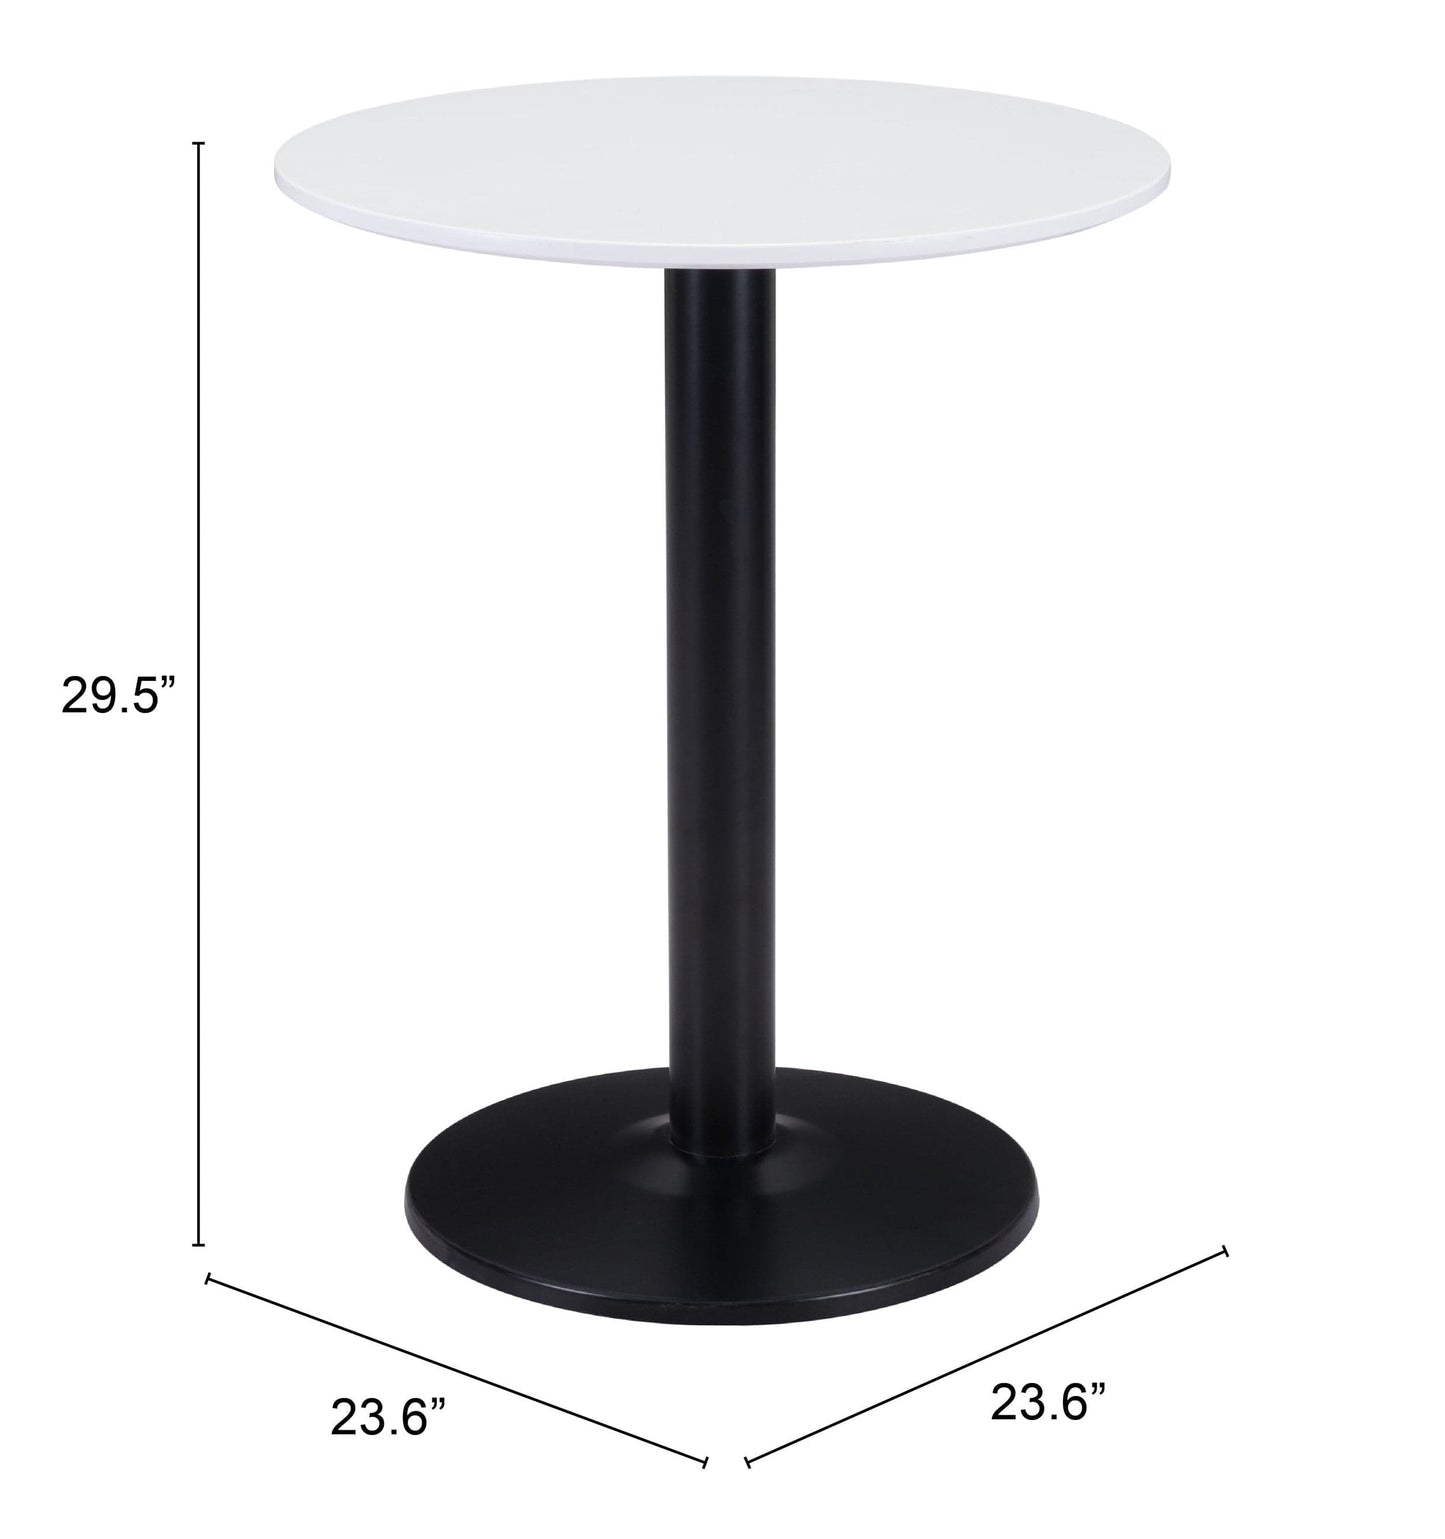 Measurements of table